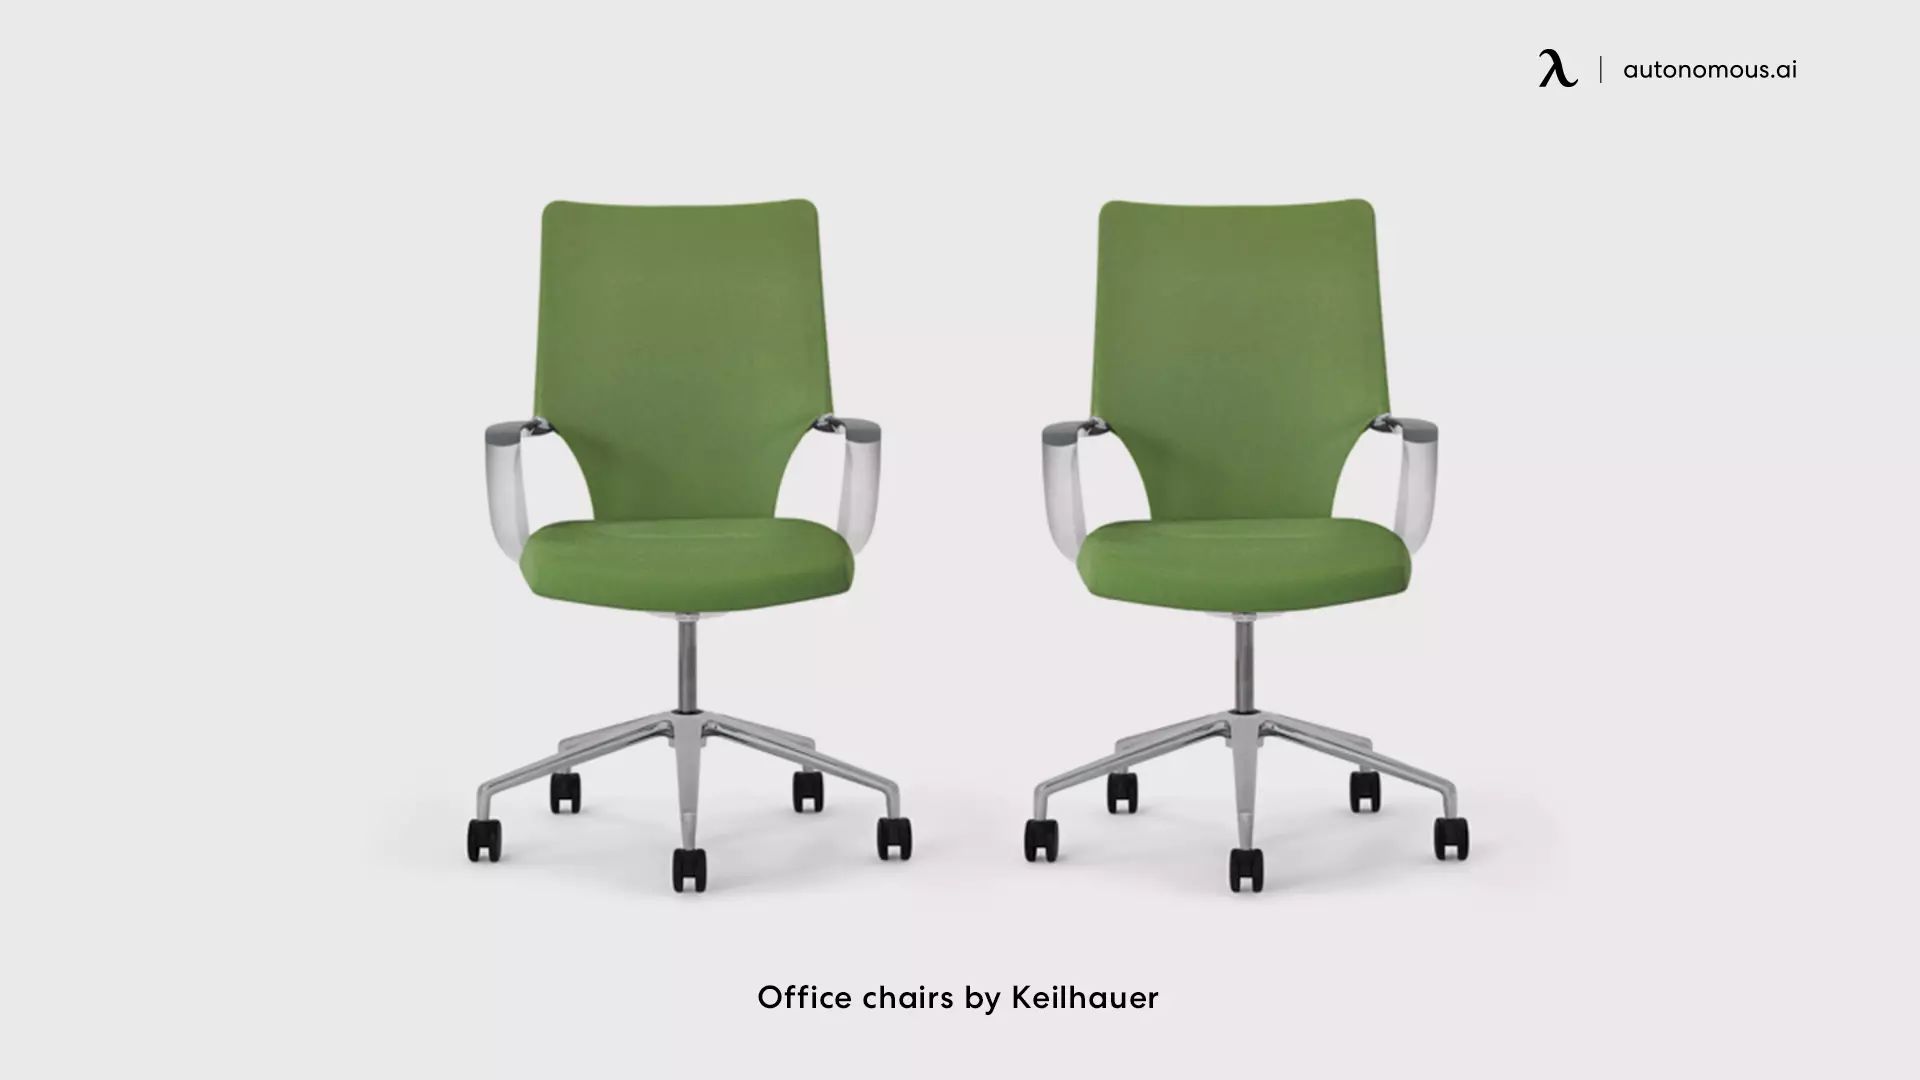 Office chairs by Keilhauer